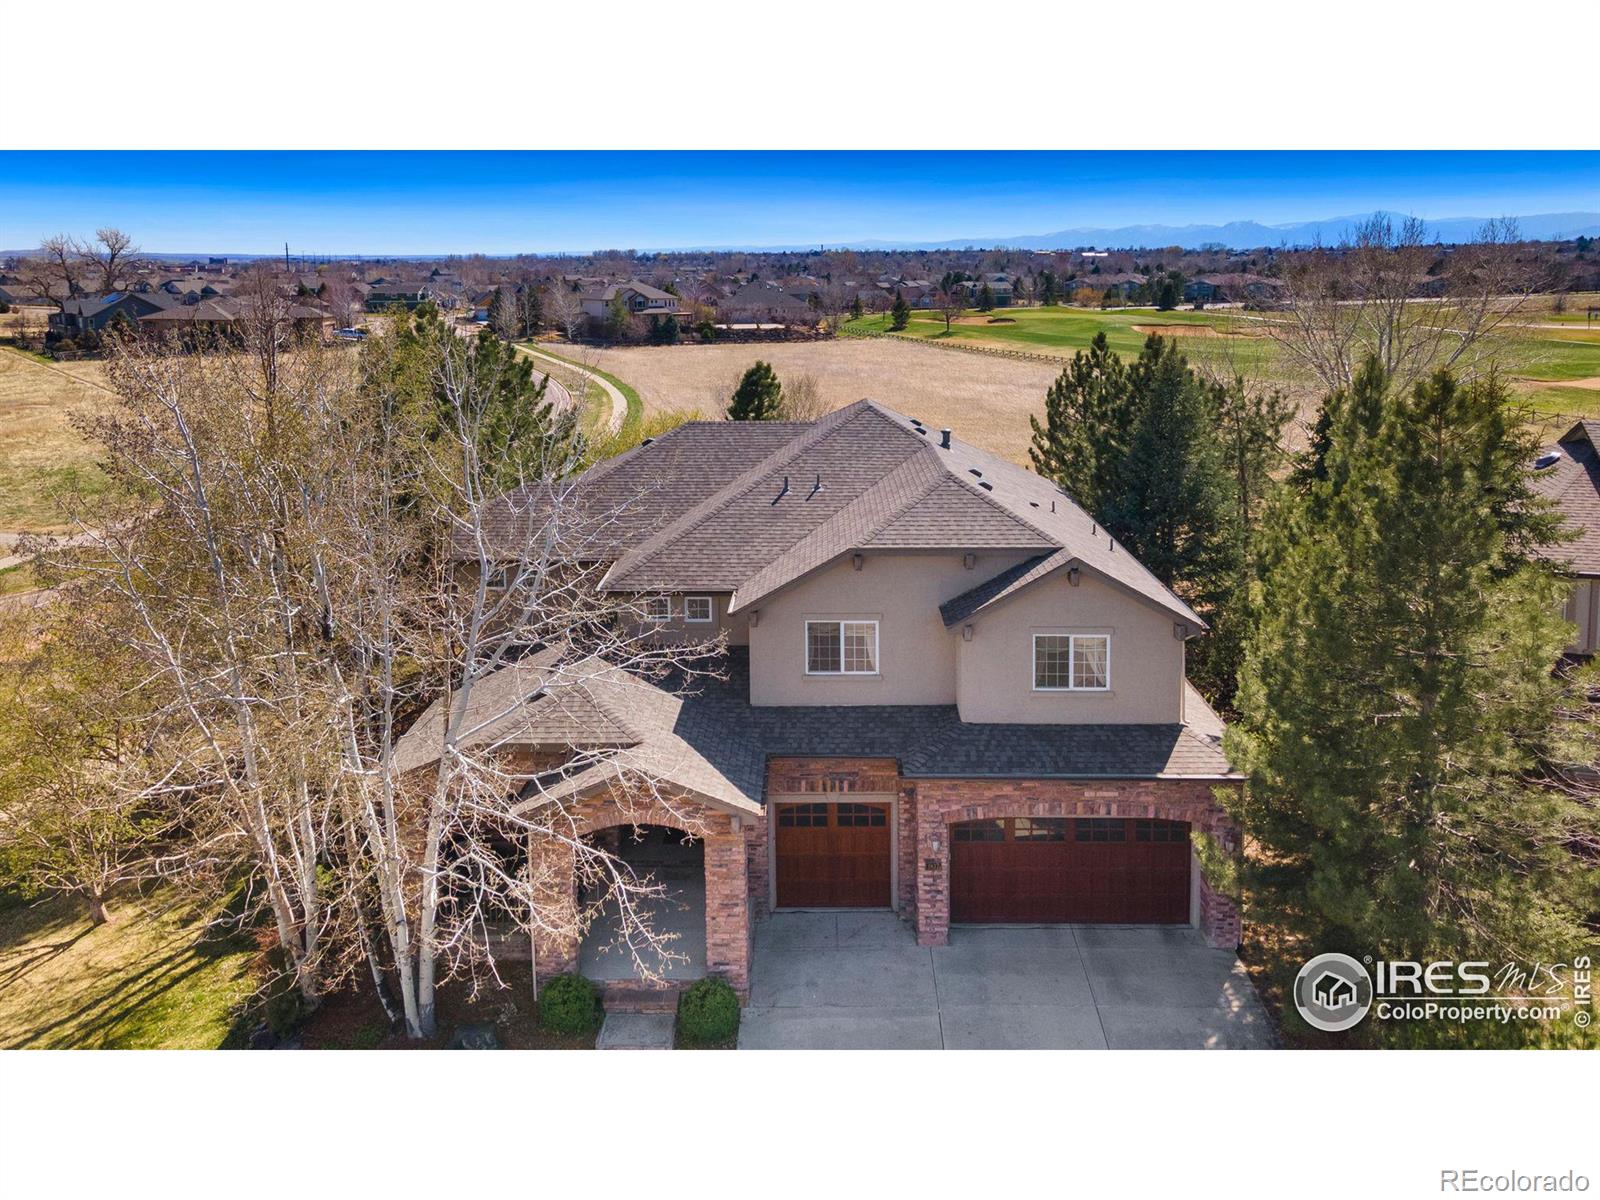 1817  Wasach Drive, longmont MLS: 4567891006823 Beds: 4 Baths: 4 Price: $1,115,000